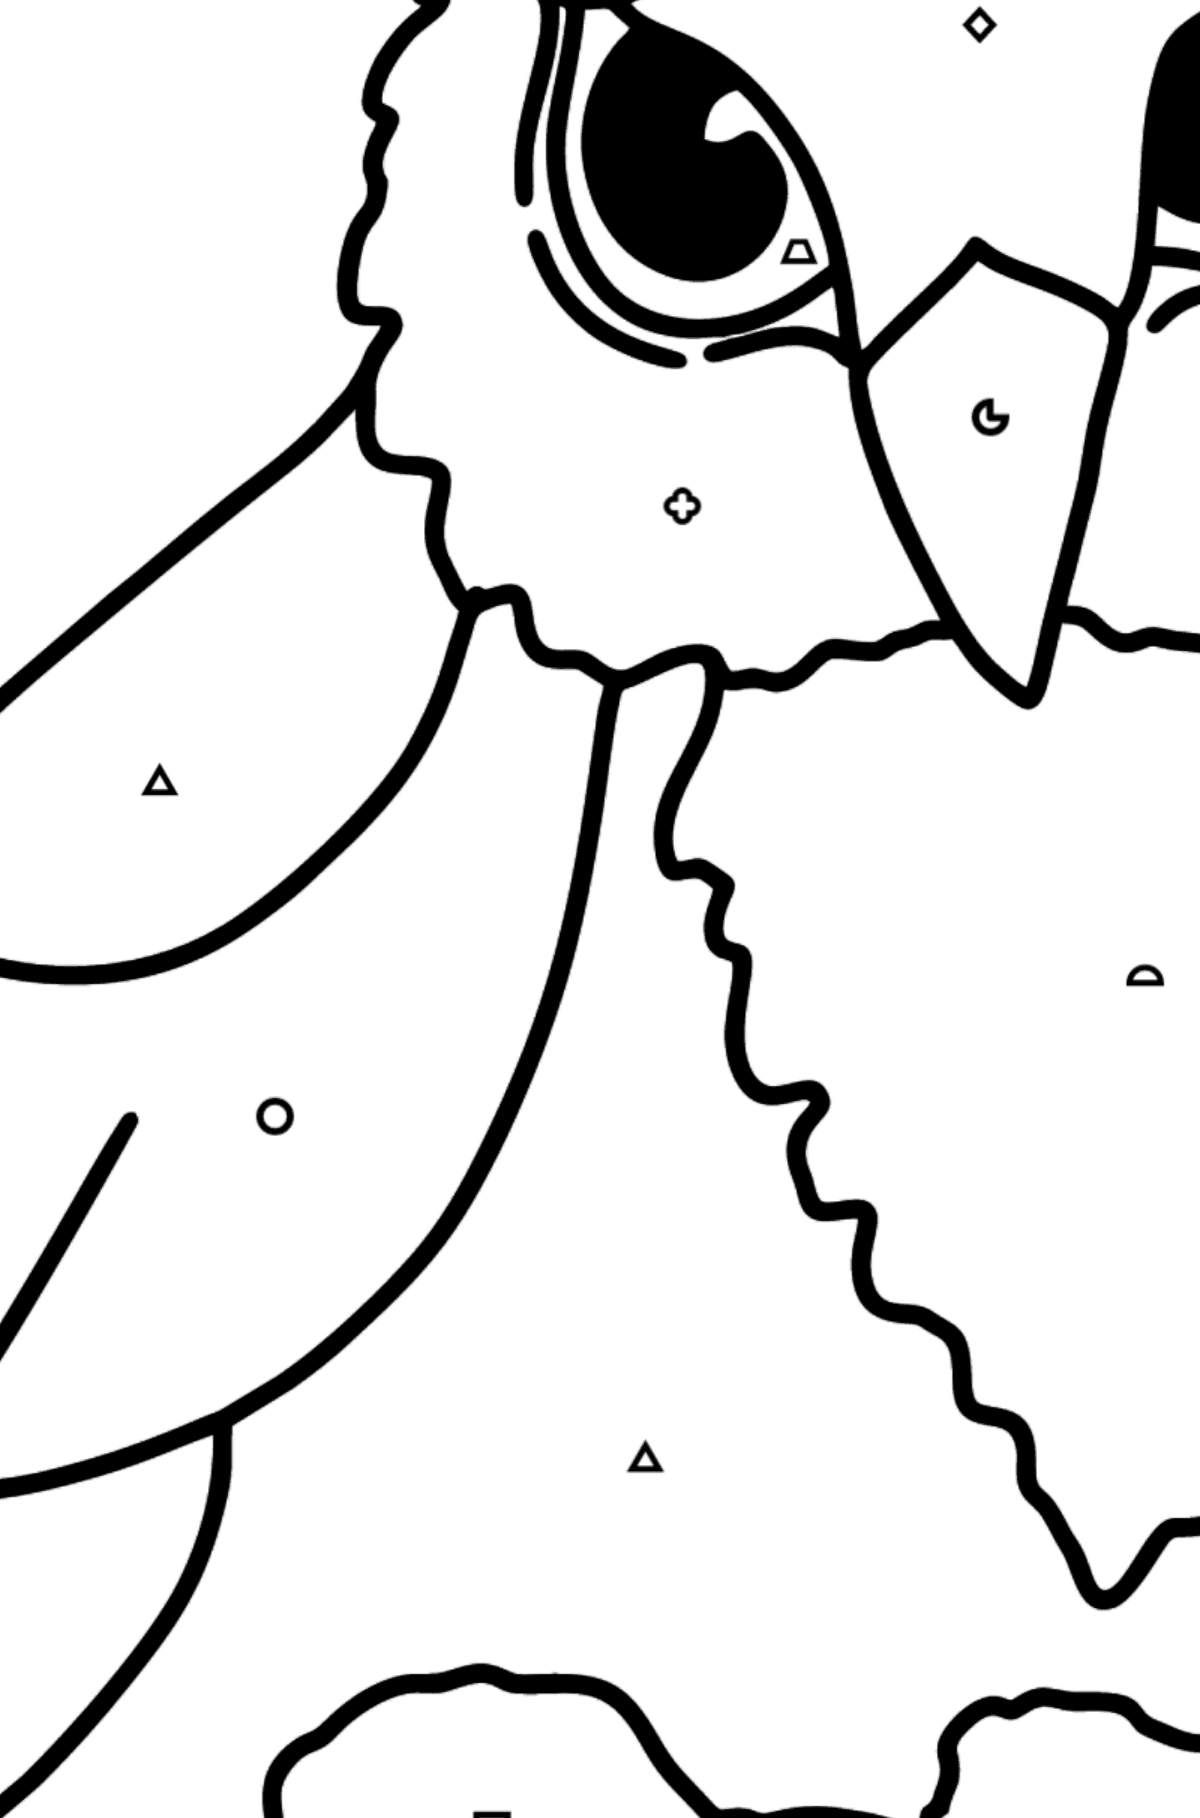 Bird coloring page - Owlet - Coloring by Geometric Shapes for Kids